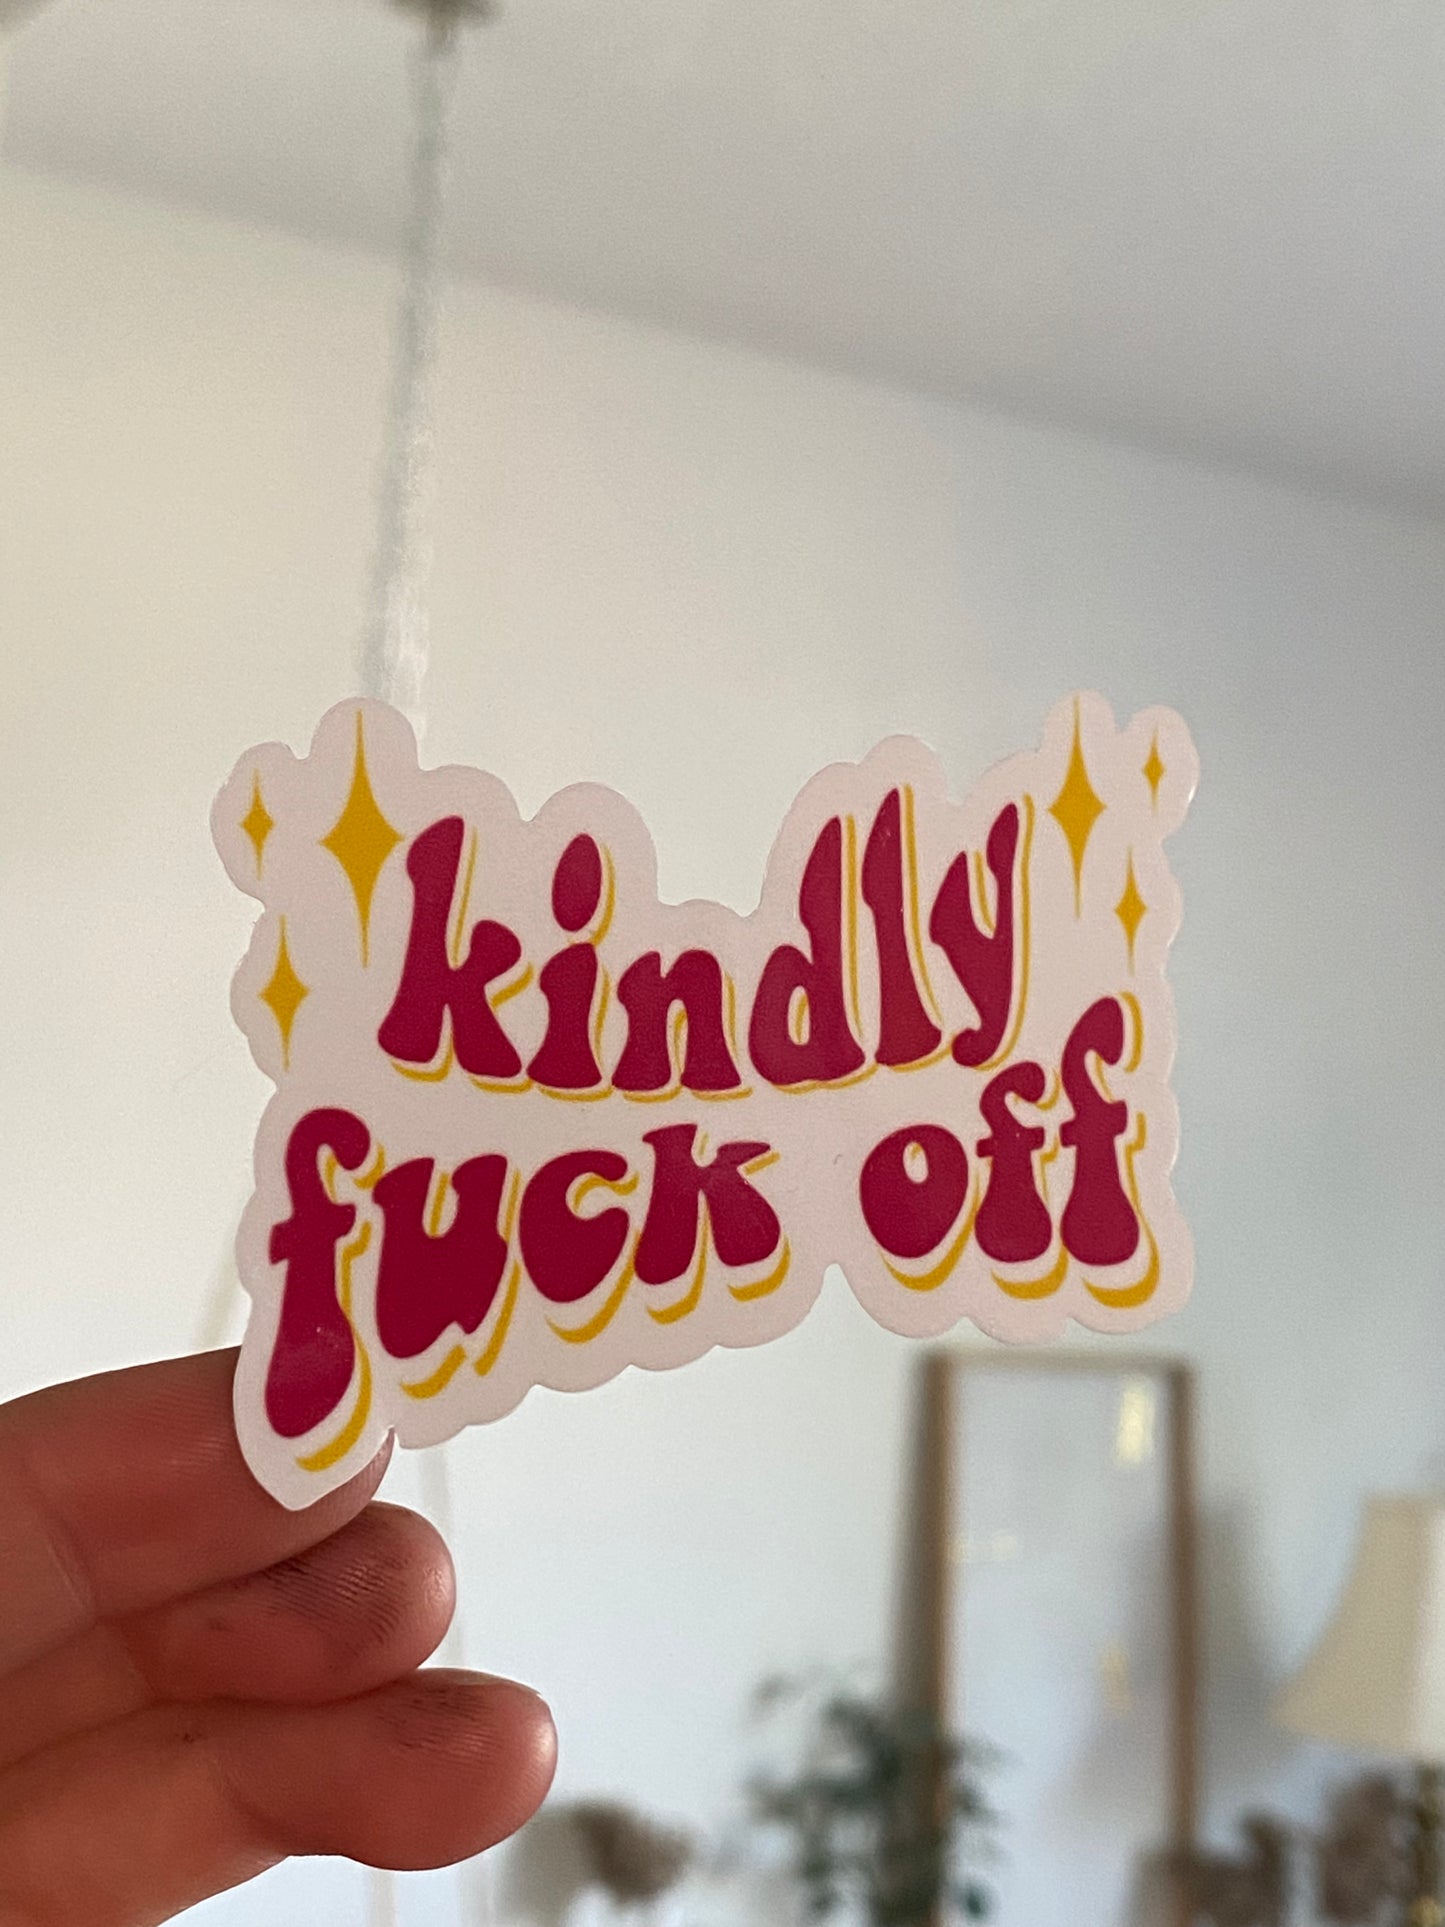 Kindly fuck off sticker